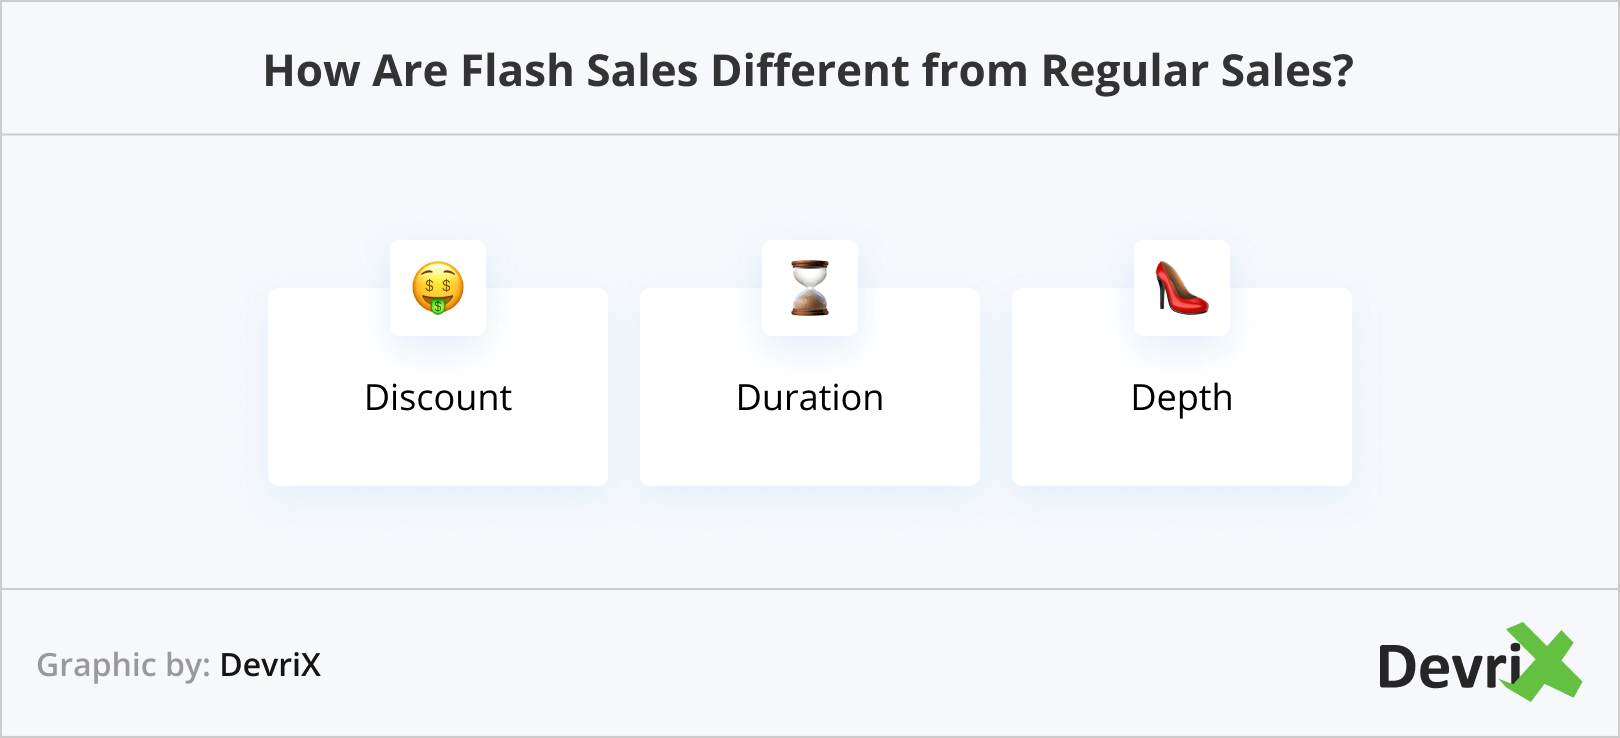 How Are Flash Sales Different from Regular Sales